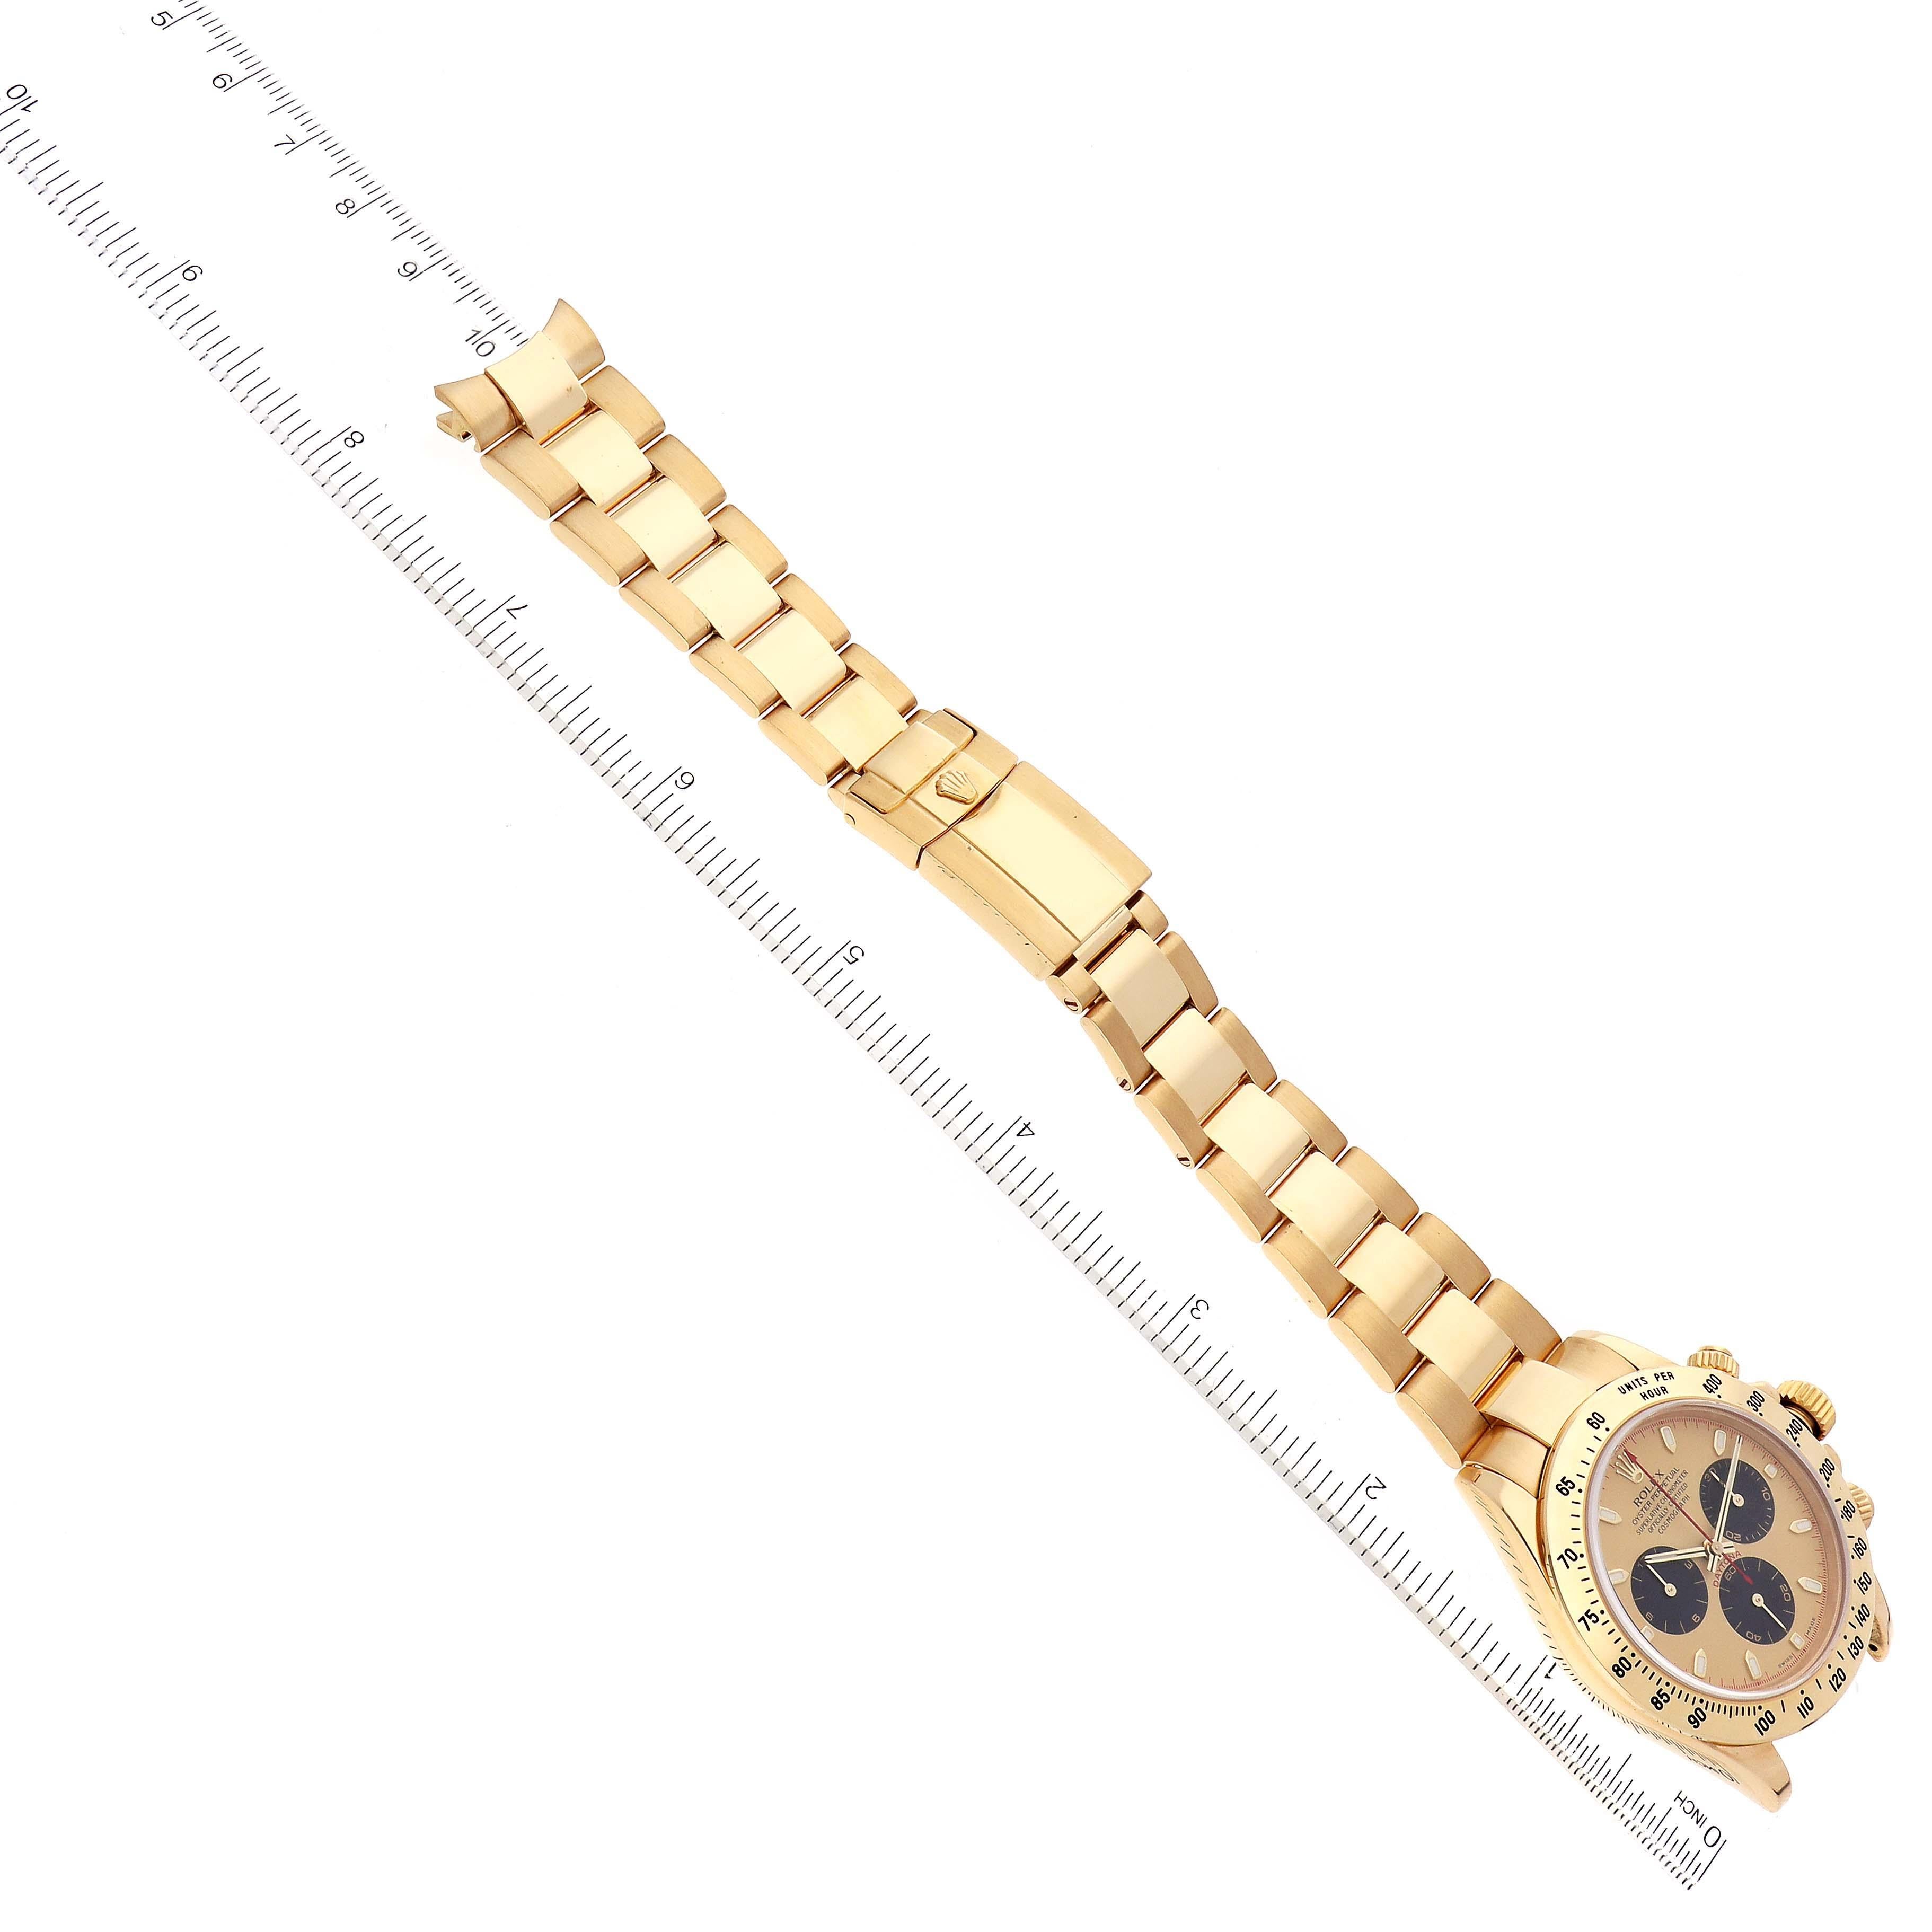 Rolex Daytona Yellow Gold Champagne Dial Mens Watch 116528 Box Papers For Sale 8